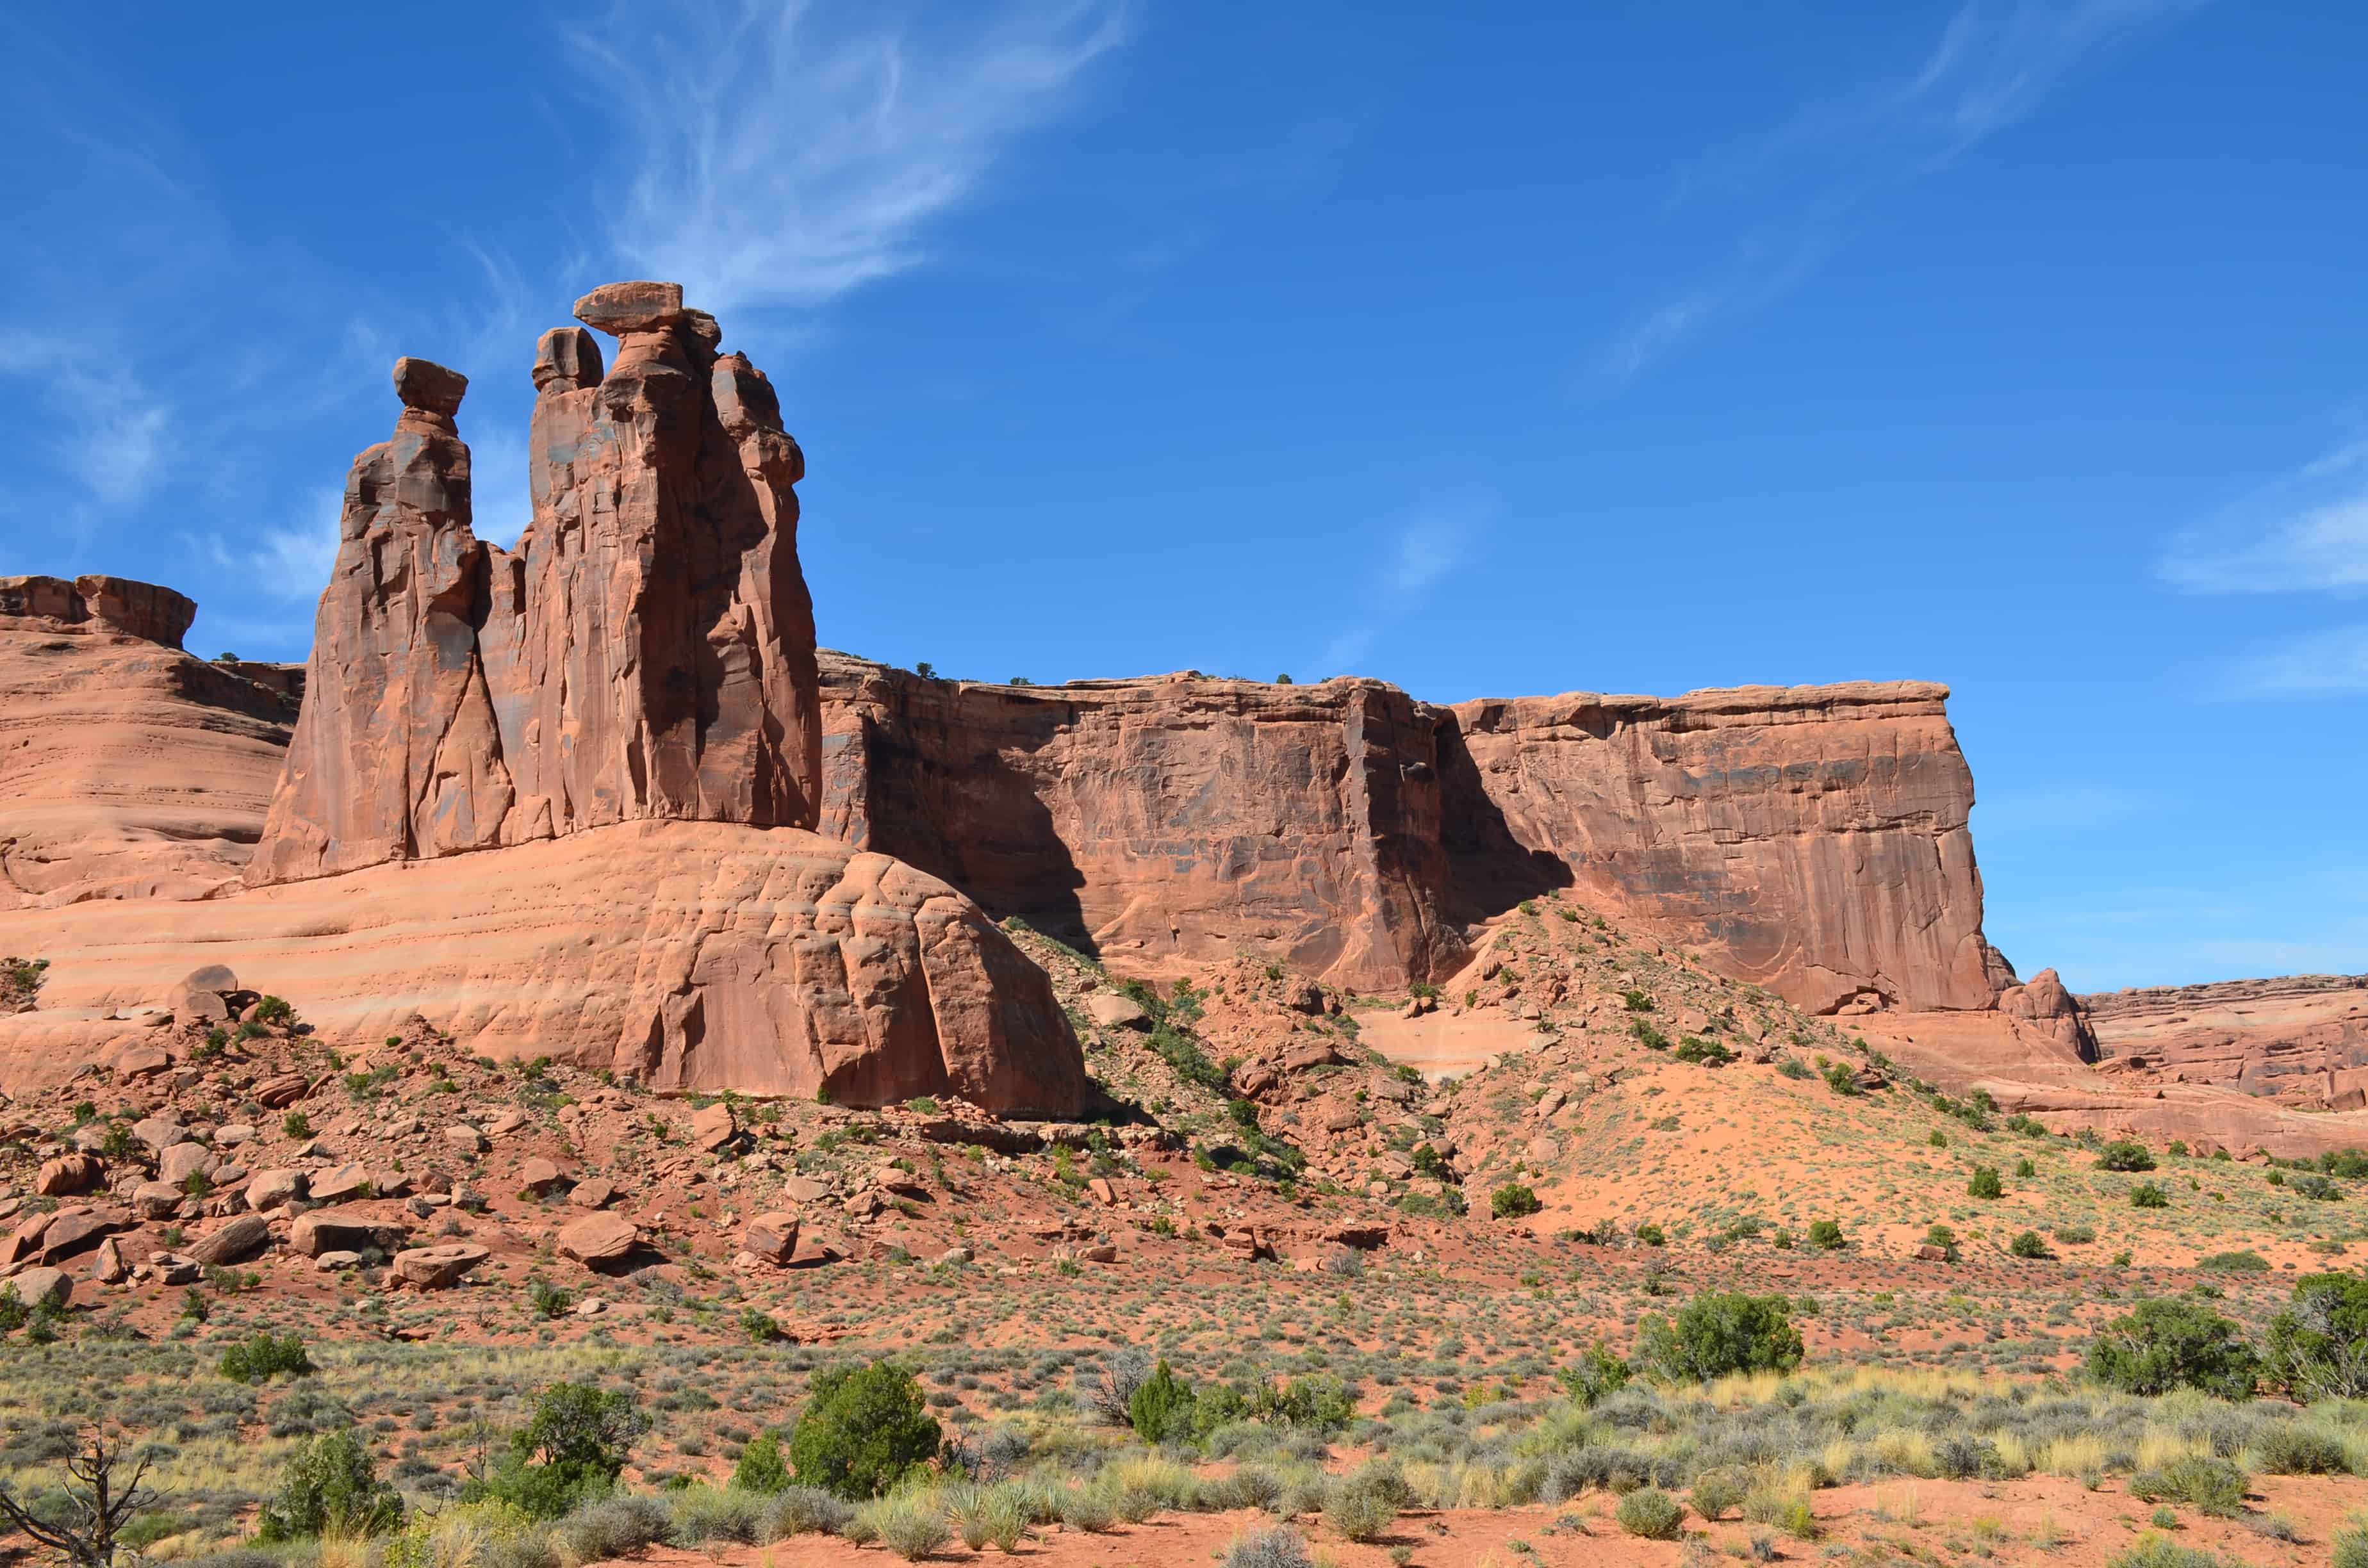 Three Gossips at Courthouse Towers Viewpoint at Arches National Park, Utah